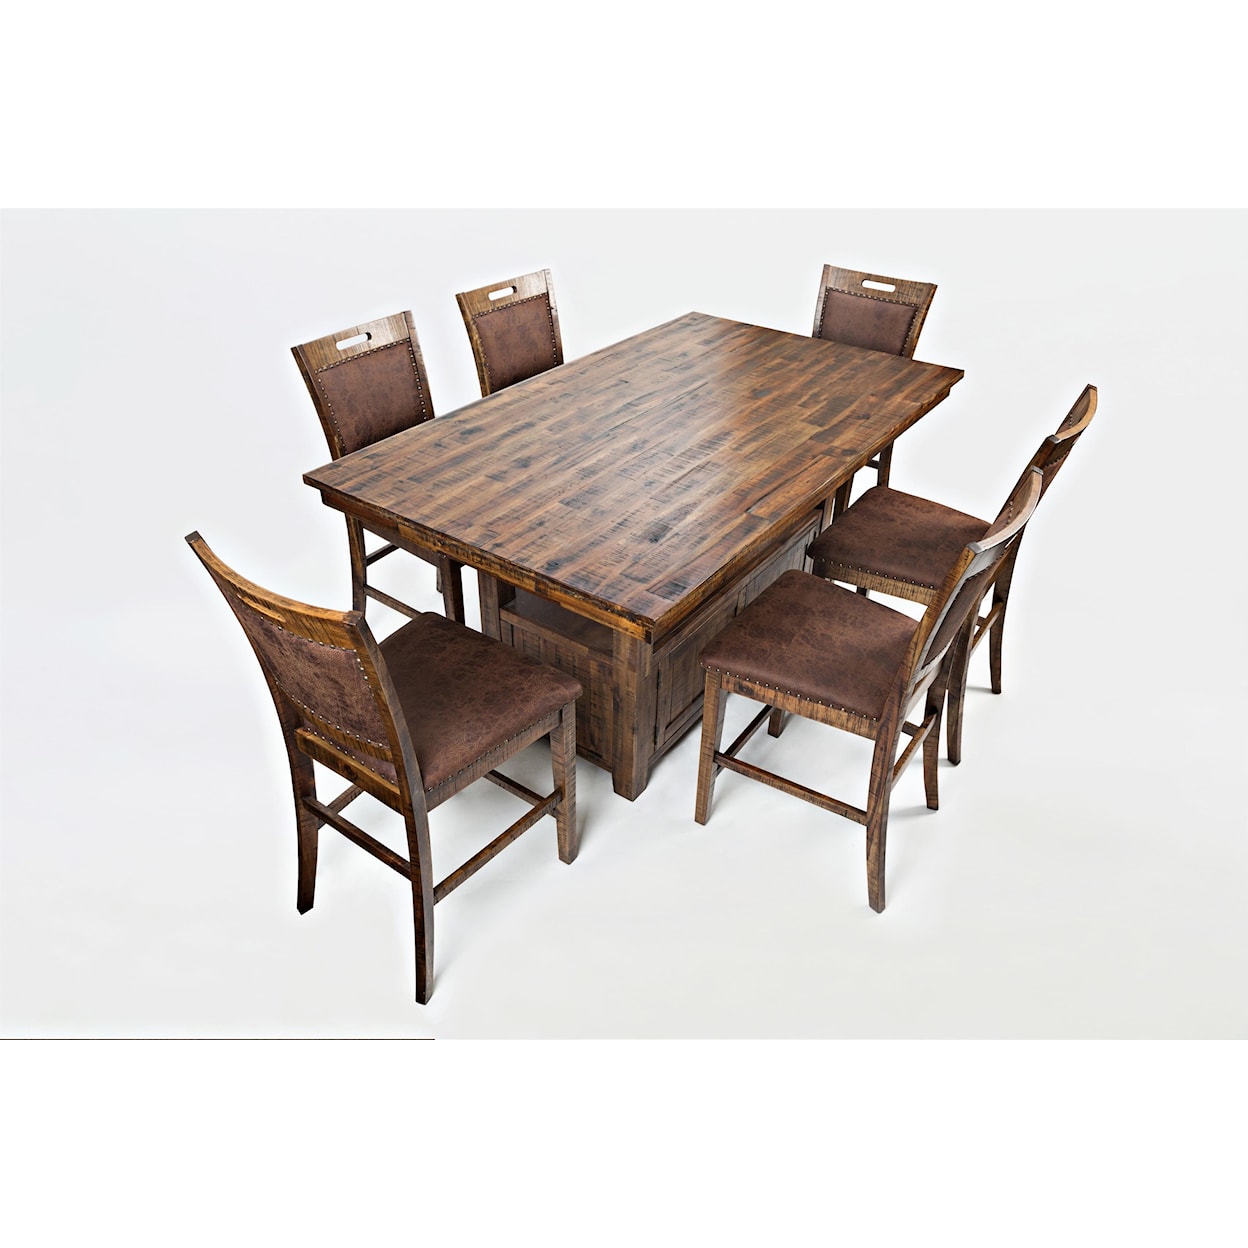 Jofran Cannon Valley Cannon Valley Counter Height Table & 6 Stool